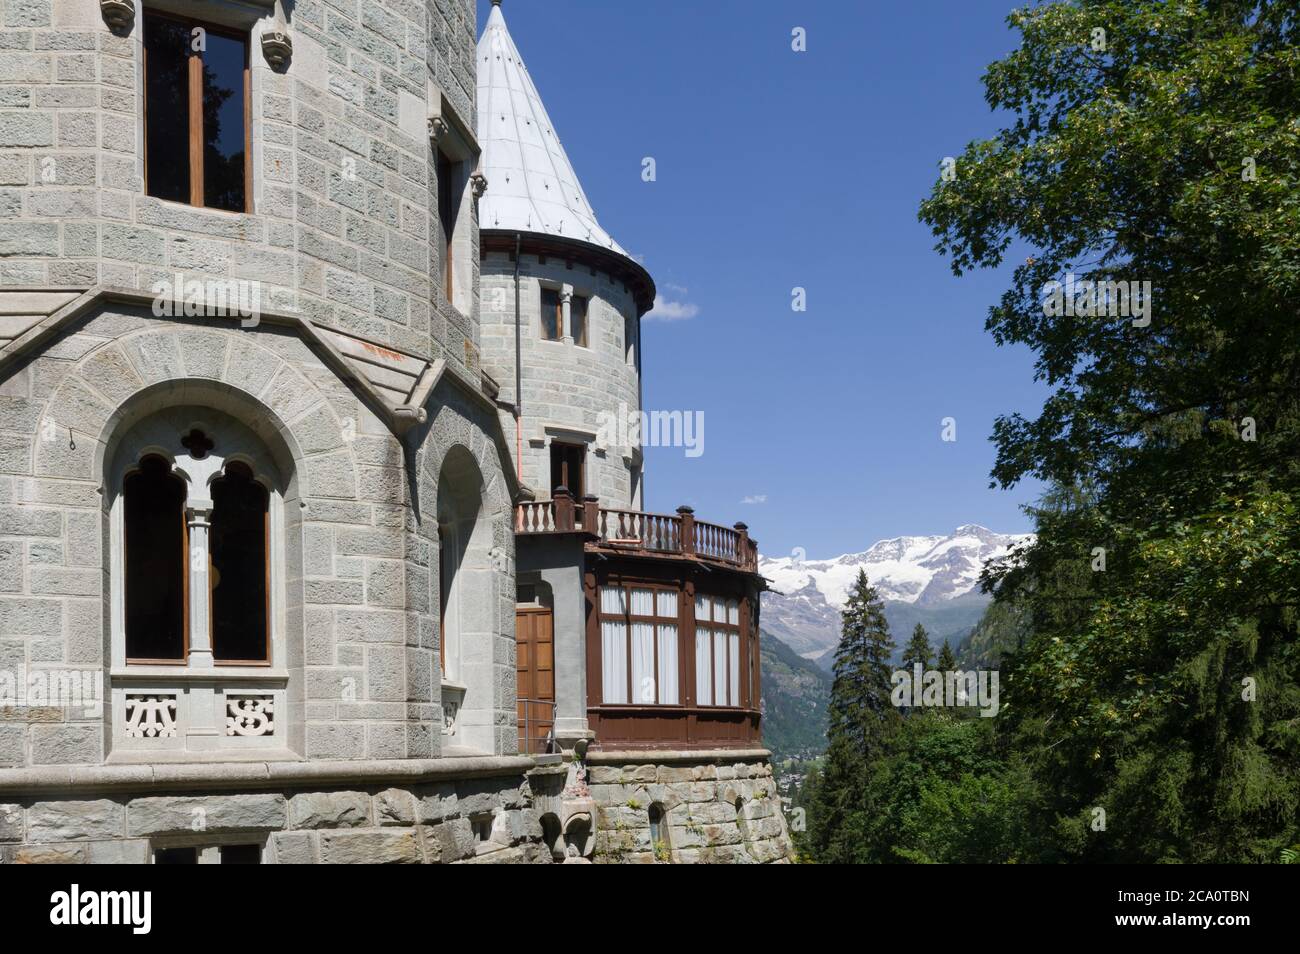 Gressoney-Saint-Jean, Italy (31st July 2020) - The Castle Savoia, built  1899-1904 for the italian queen Margherita, with Monte Rosa in the background Stock Photo